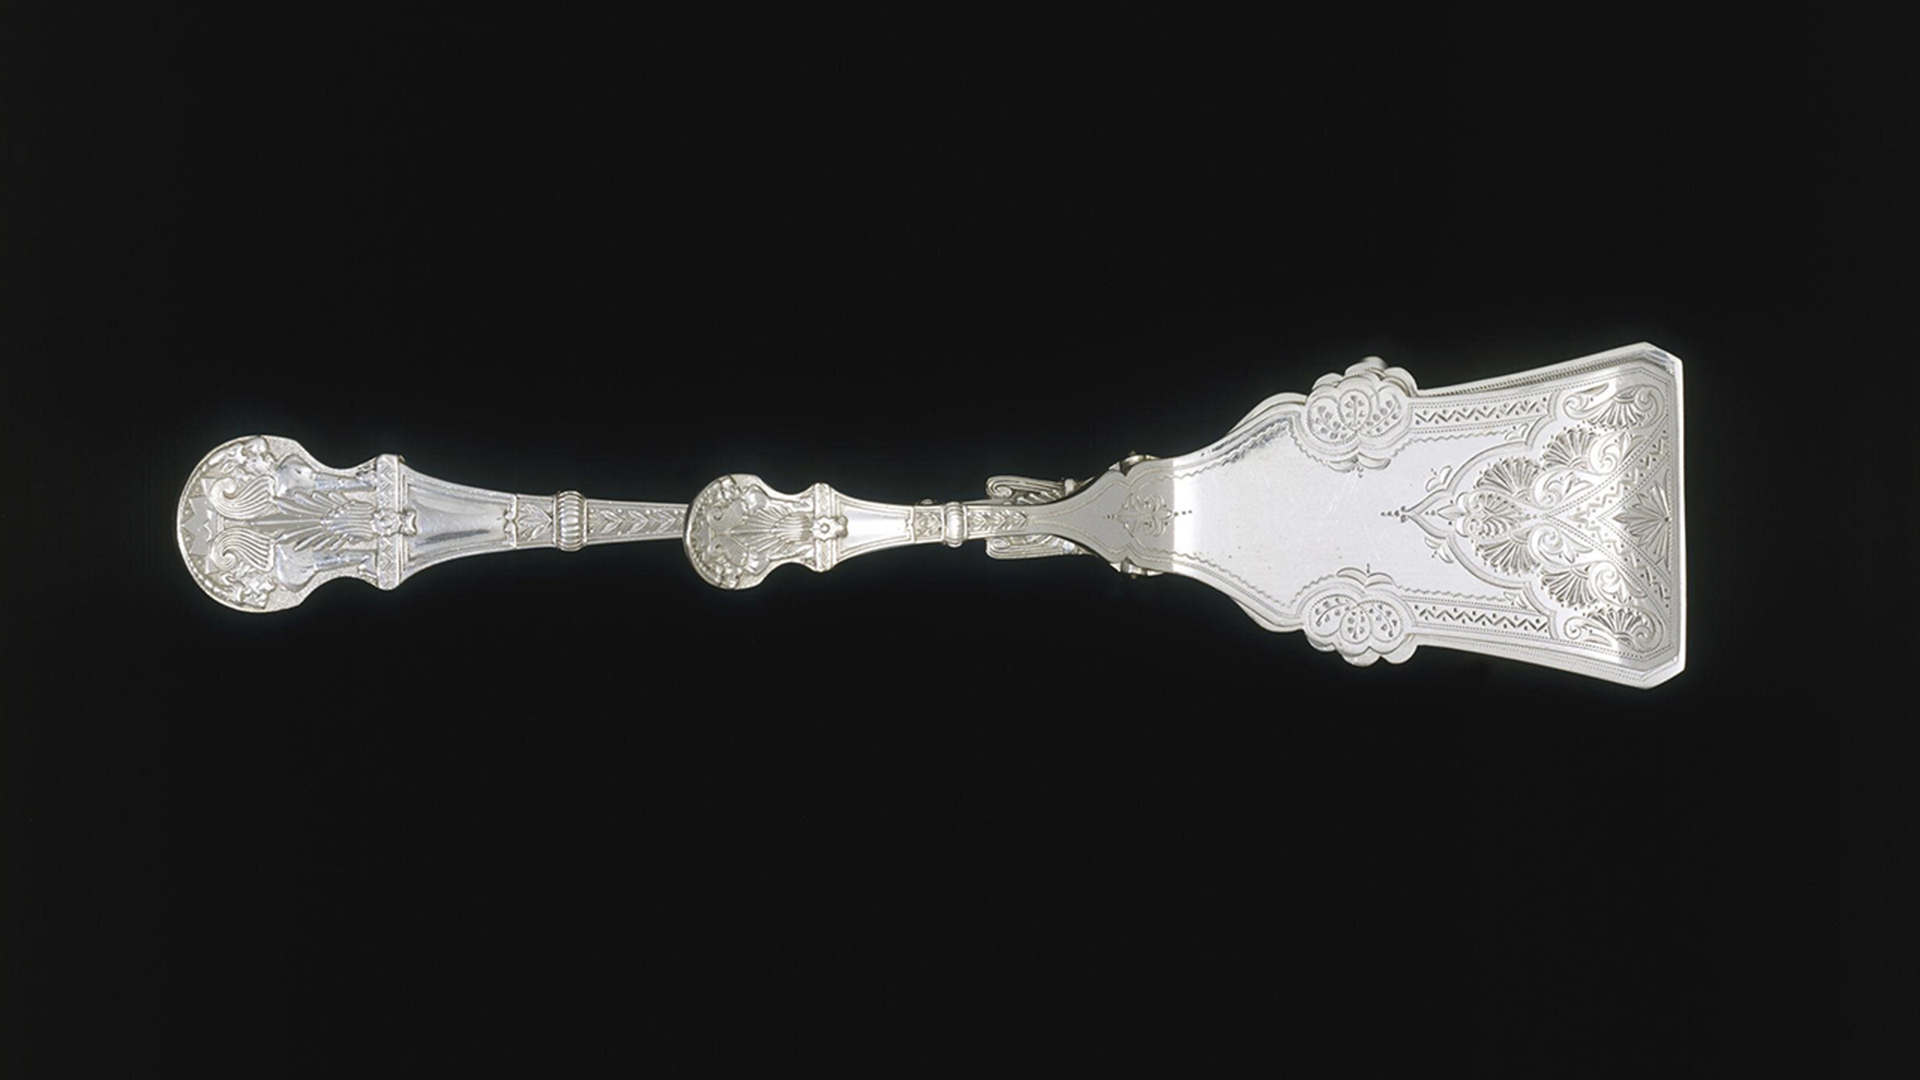 Silver serving tong with large flat end